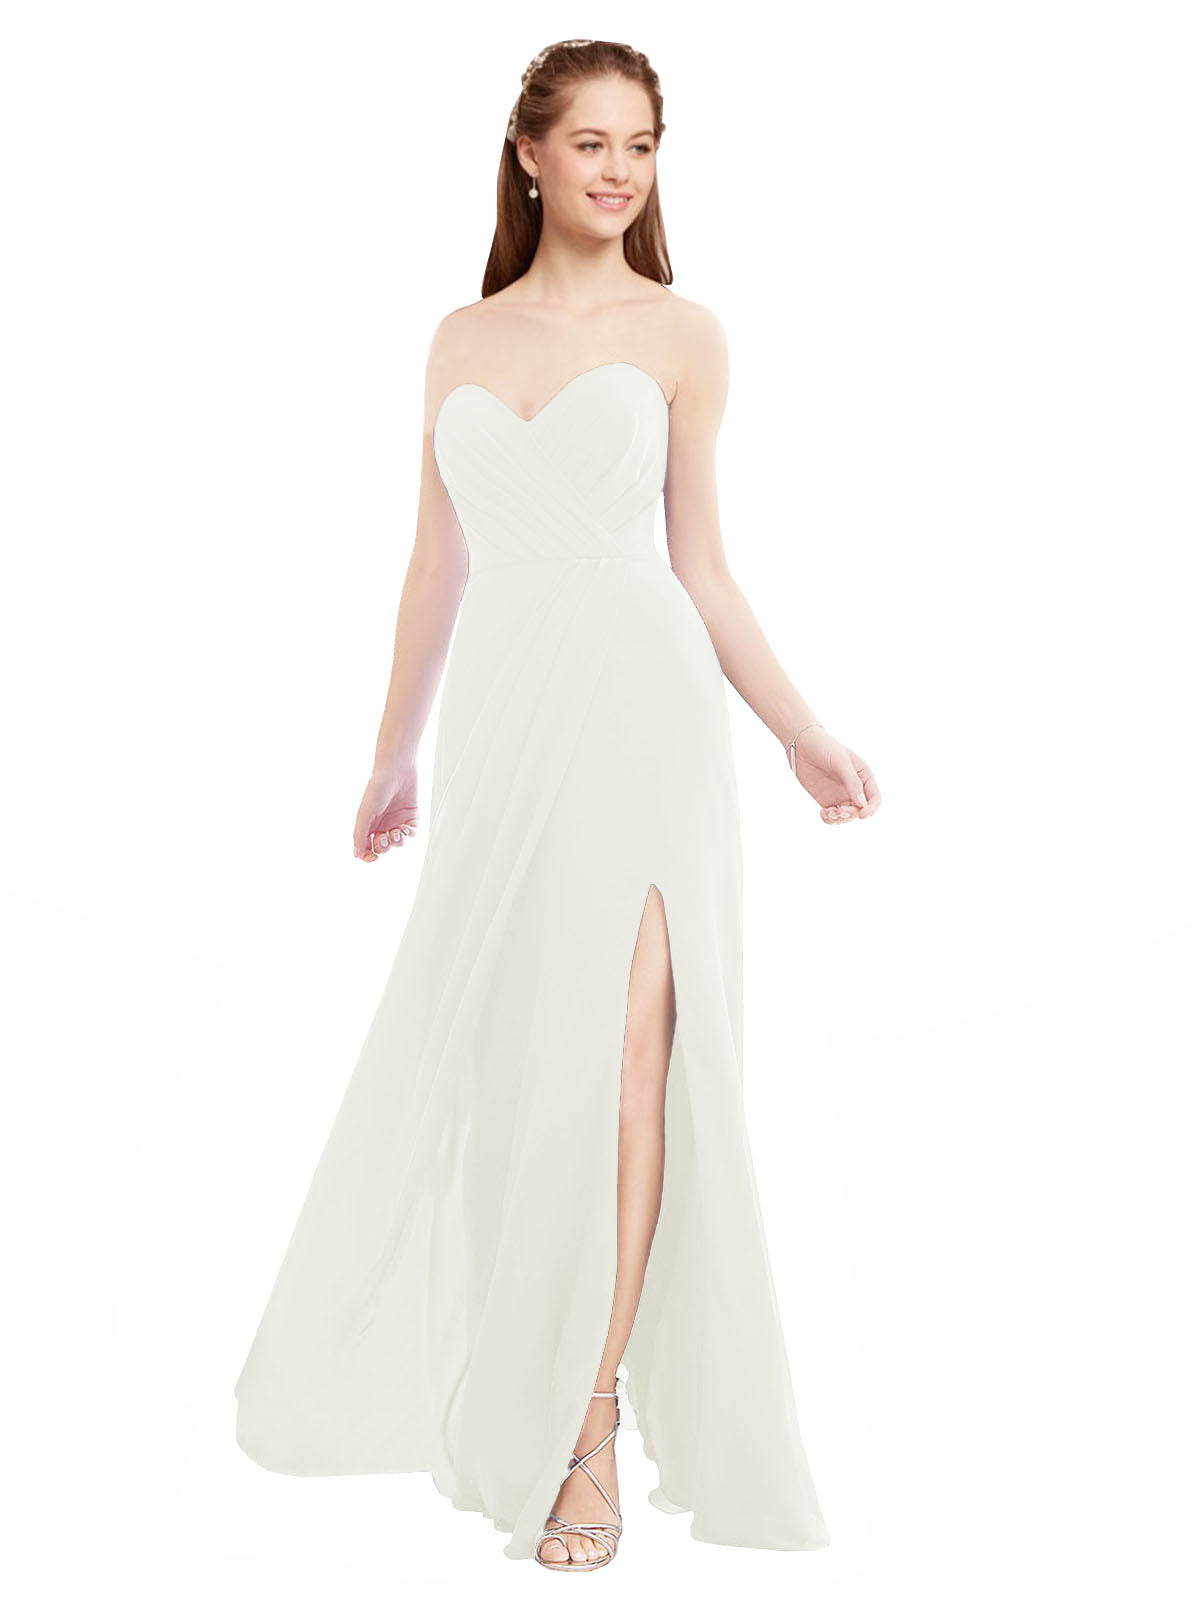 Ivory A-Line Sweetheart Strapless Sleeveless Long Bridesmaid Dress Meadow